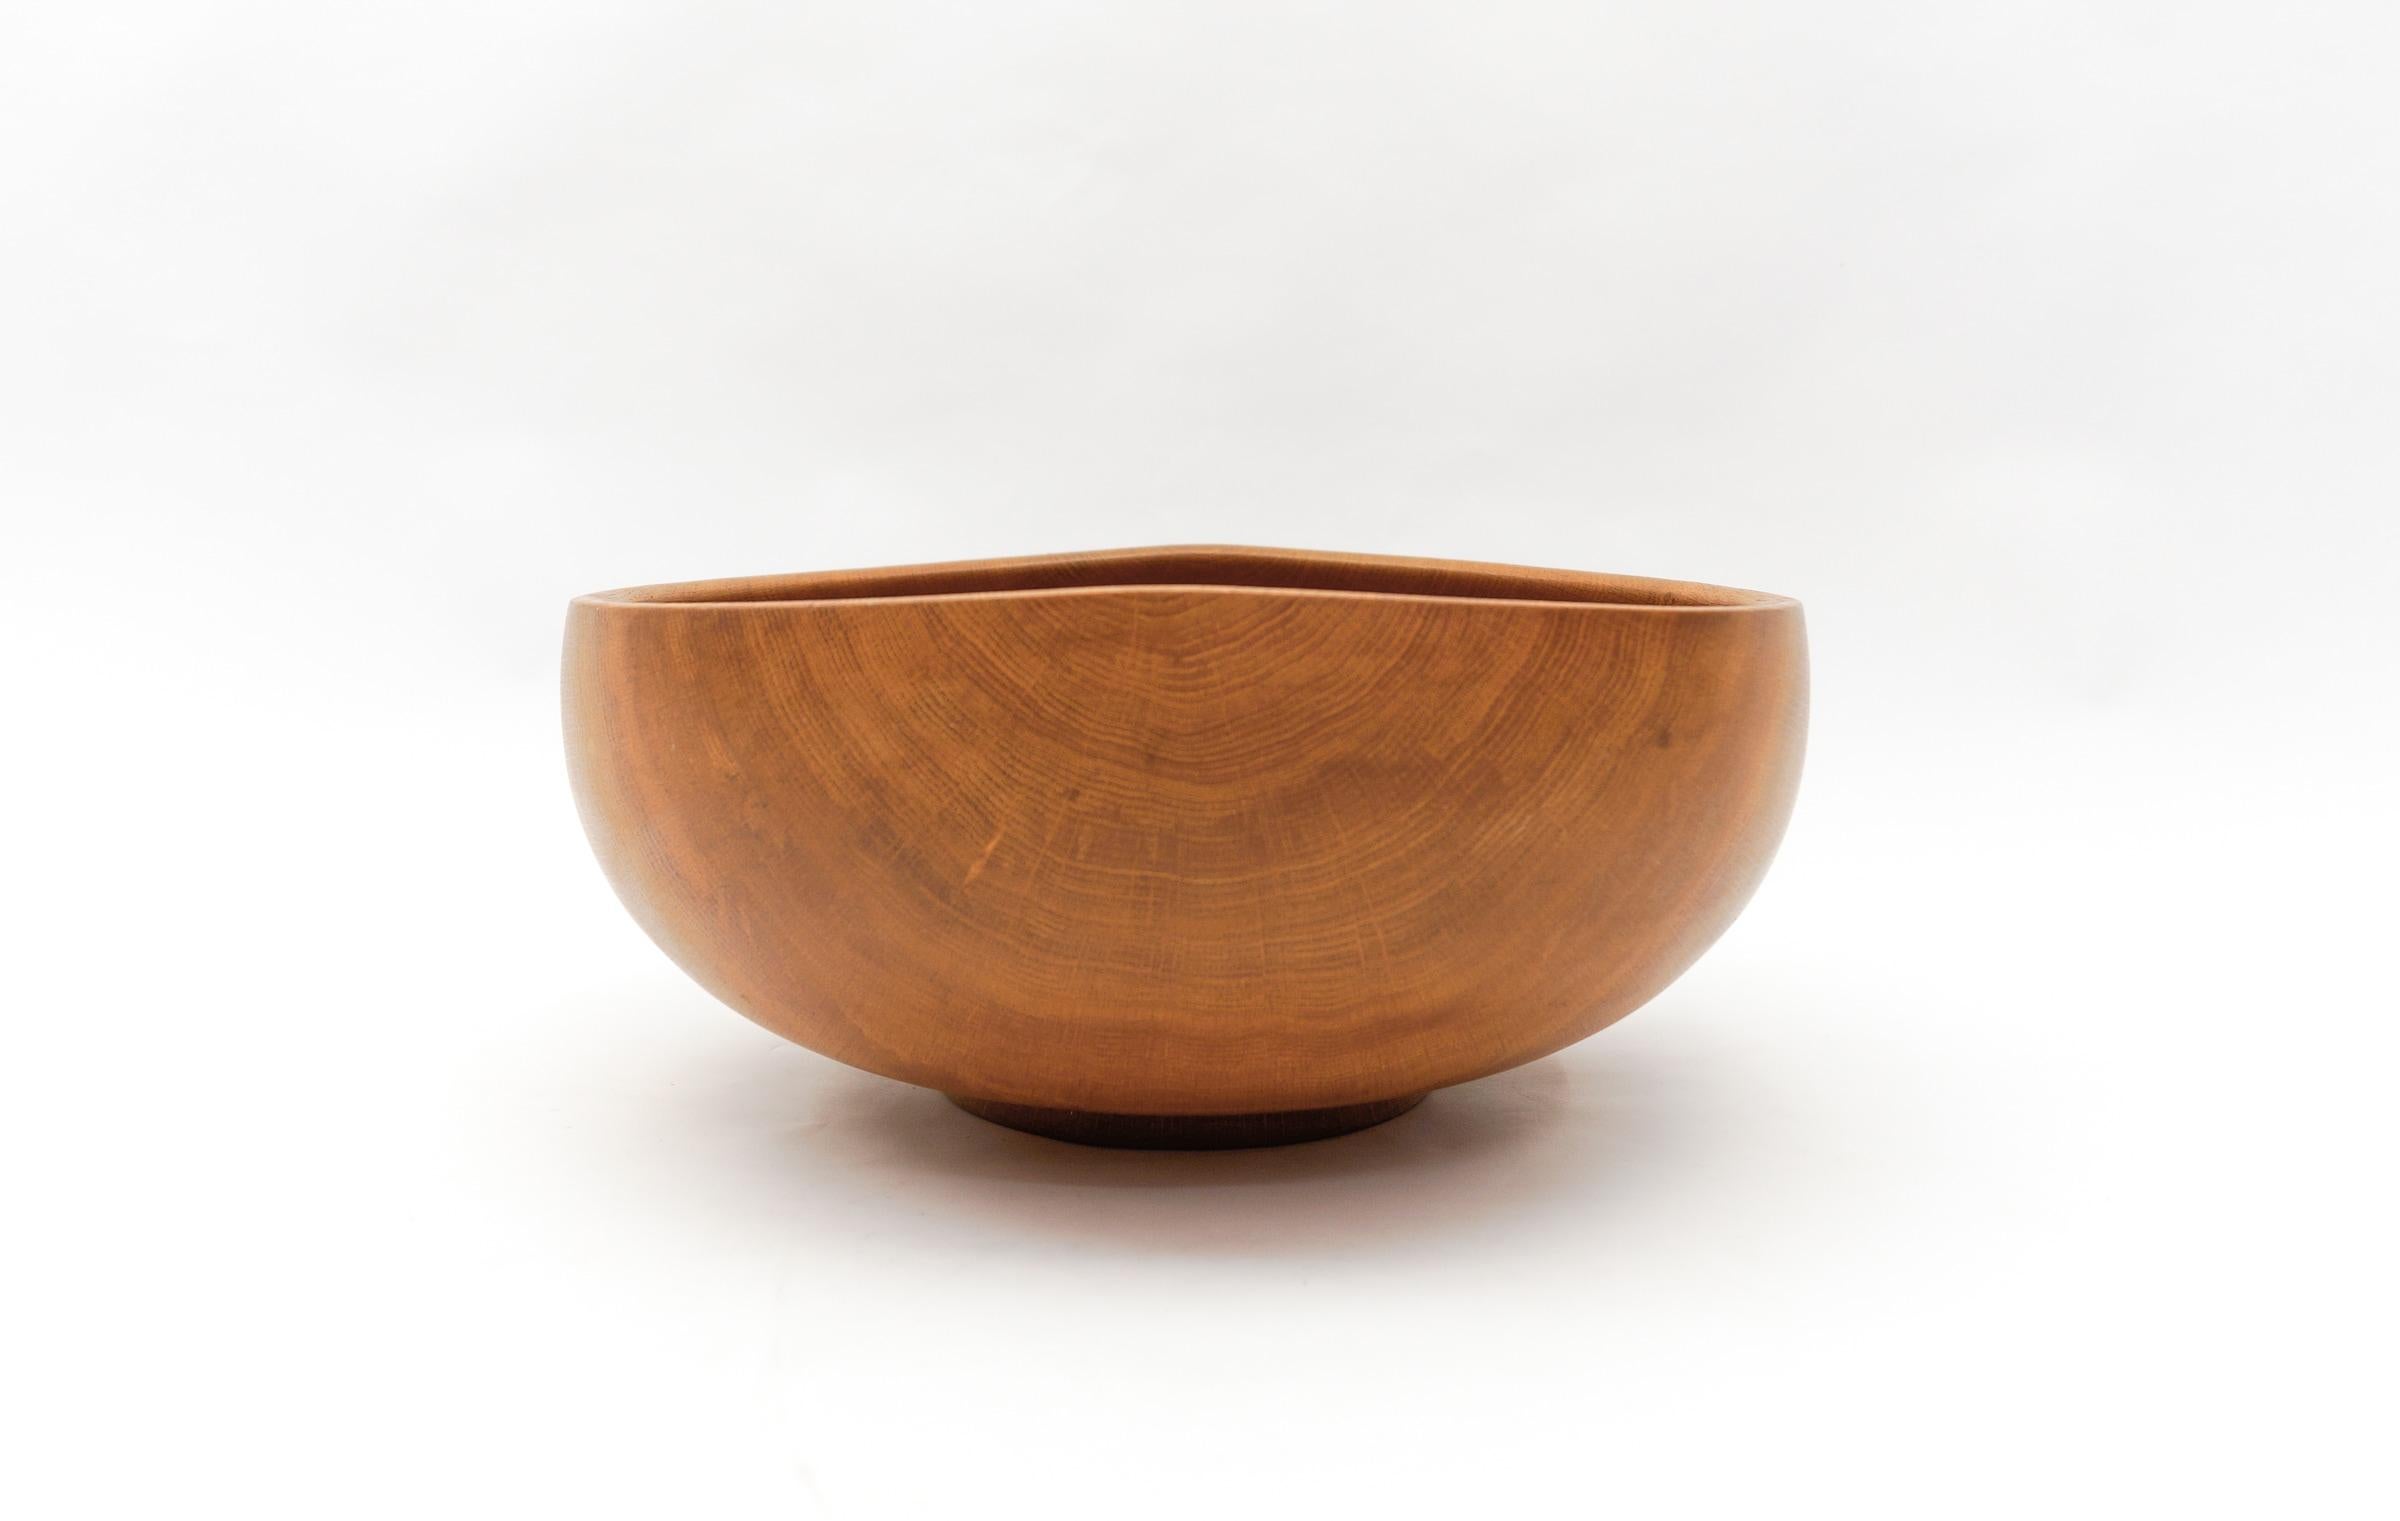 Awesome Huge Mid-Century Modern Oak Bowl by K. Weichselbaum, 1999 Germany For Sale 1